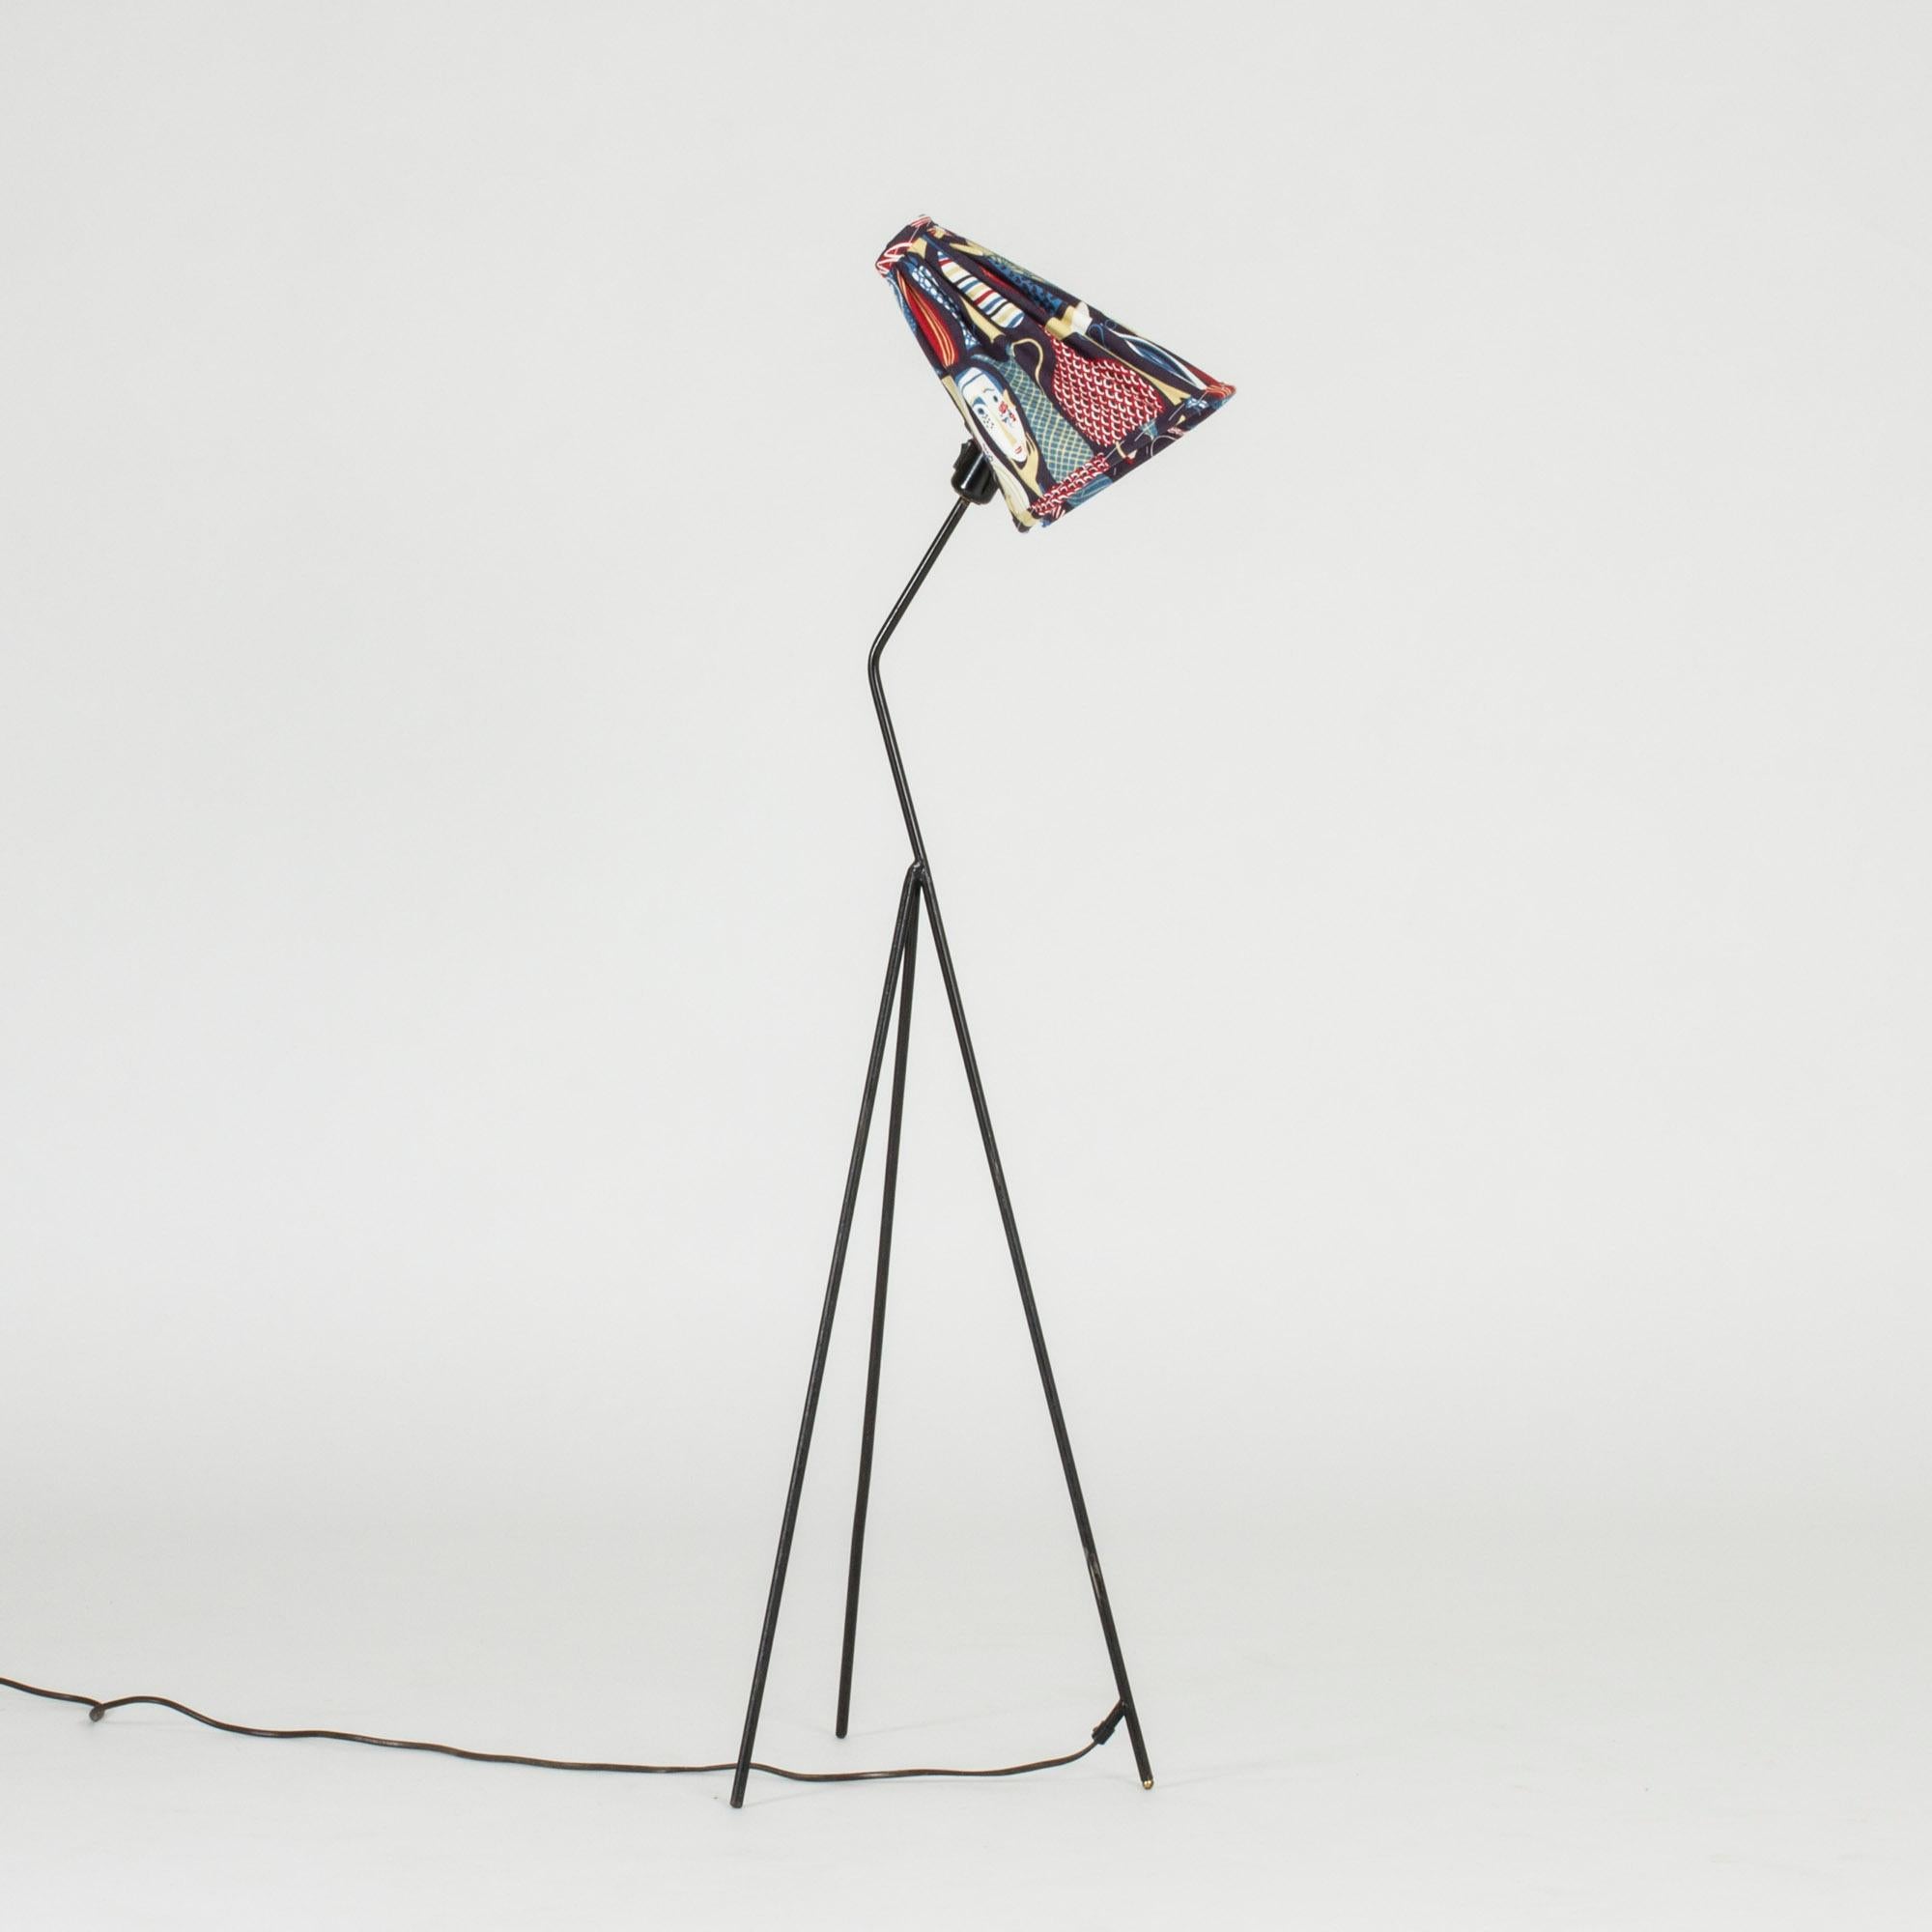 Cool and friendly “Giraffe” floor lamp by Hans Bergström for Ateljé Lyktan. Cheeky 1950s design with a shade made from vintage Stig Lindberg fabric, in the way these lamps were originally sold. Frame made of black lacquered metal.